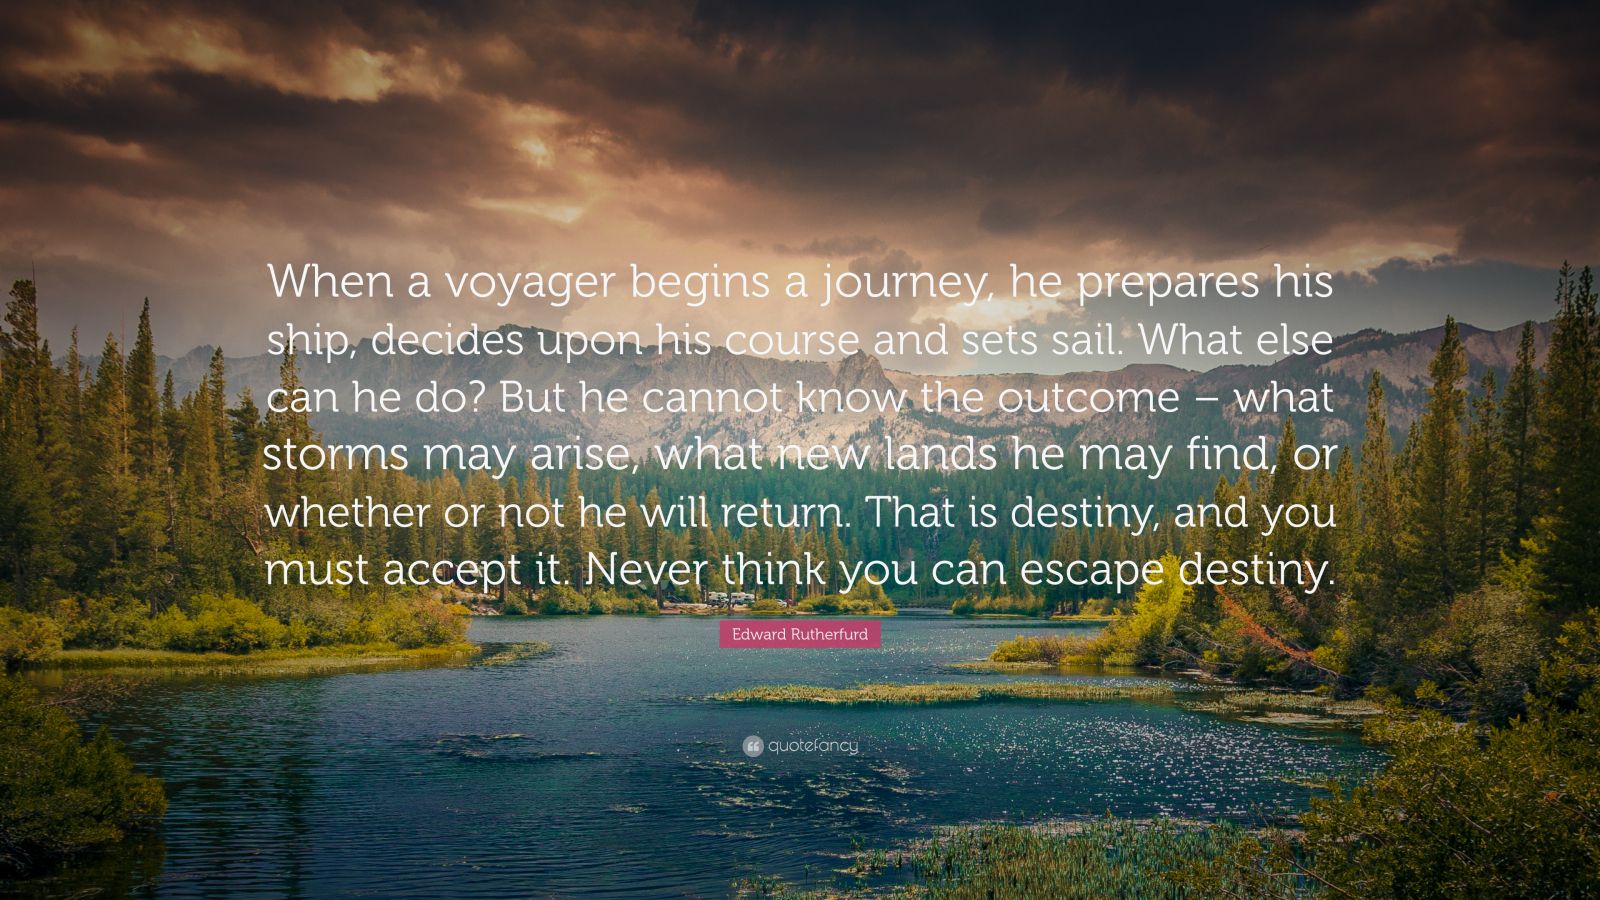 Edward Rutherfurd Quote: “When a voyager begins a journey, he prepares ...